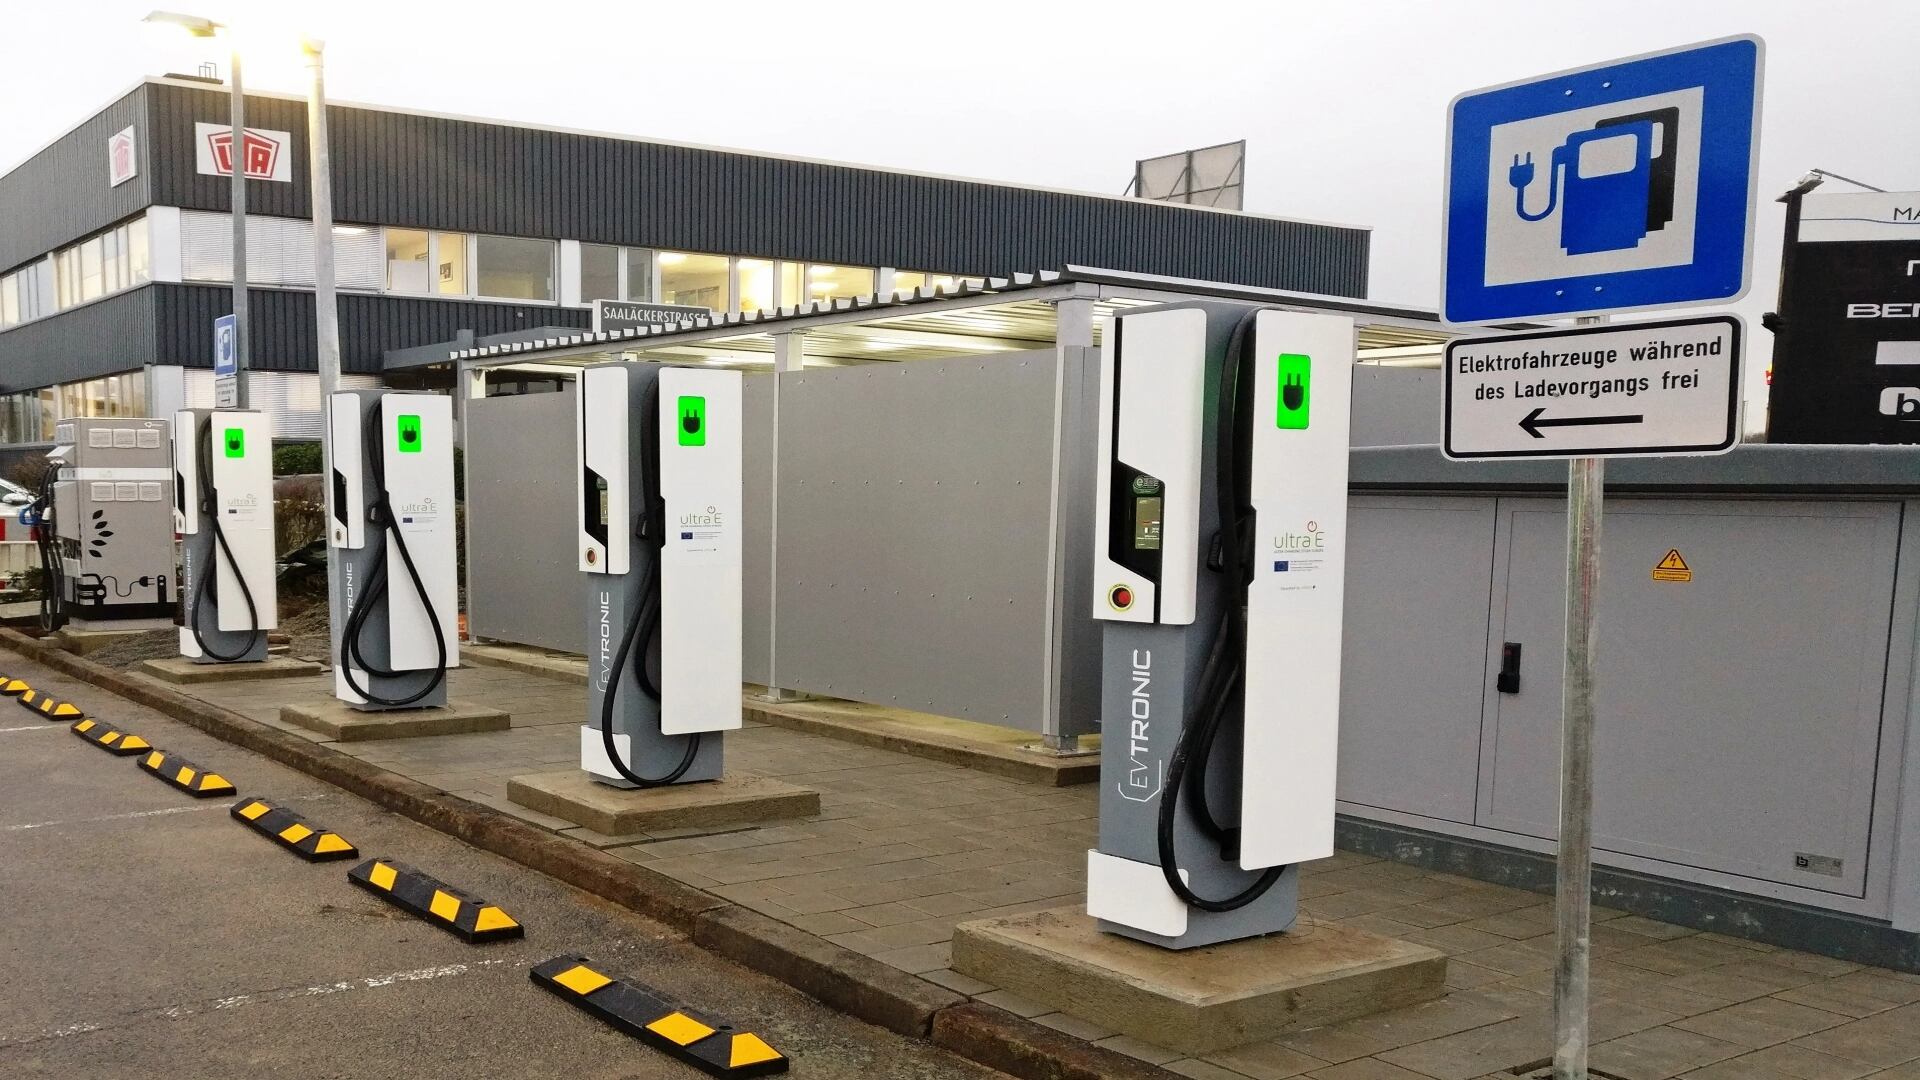 AN Electric Vehicle Charging Staion In Europe